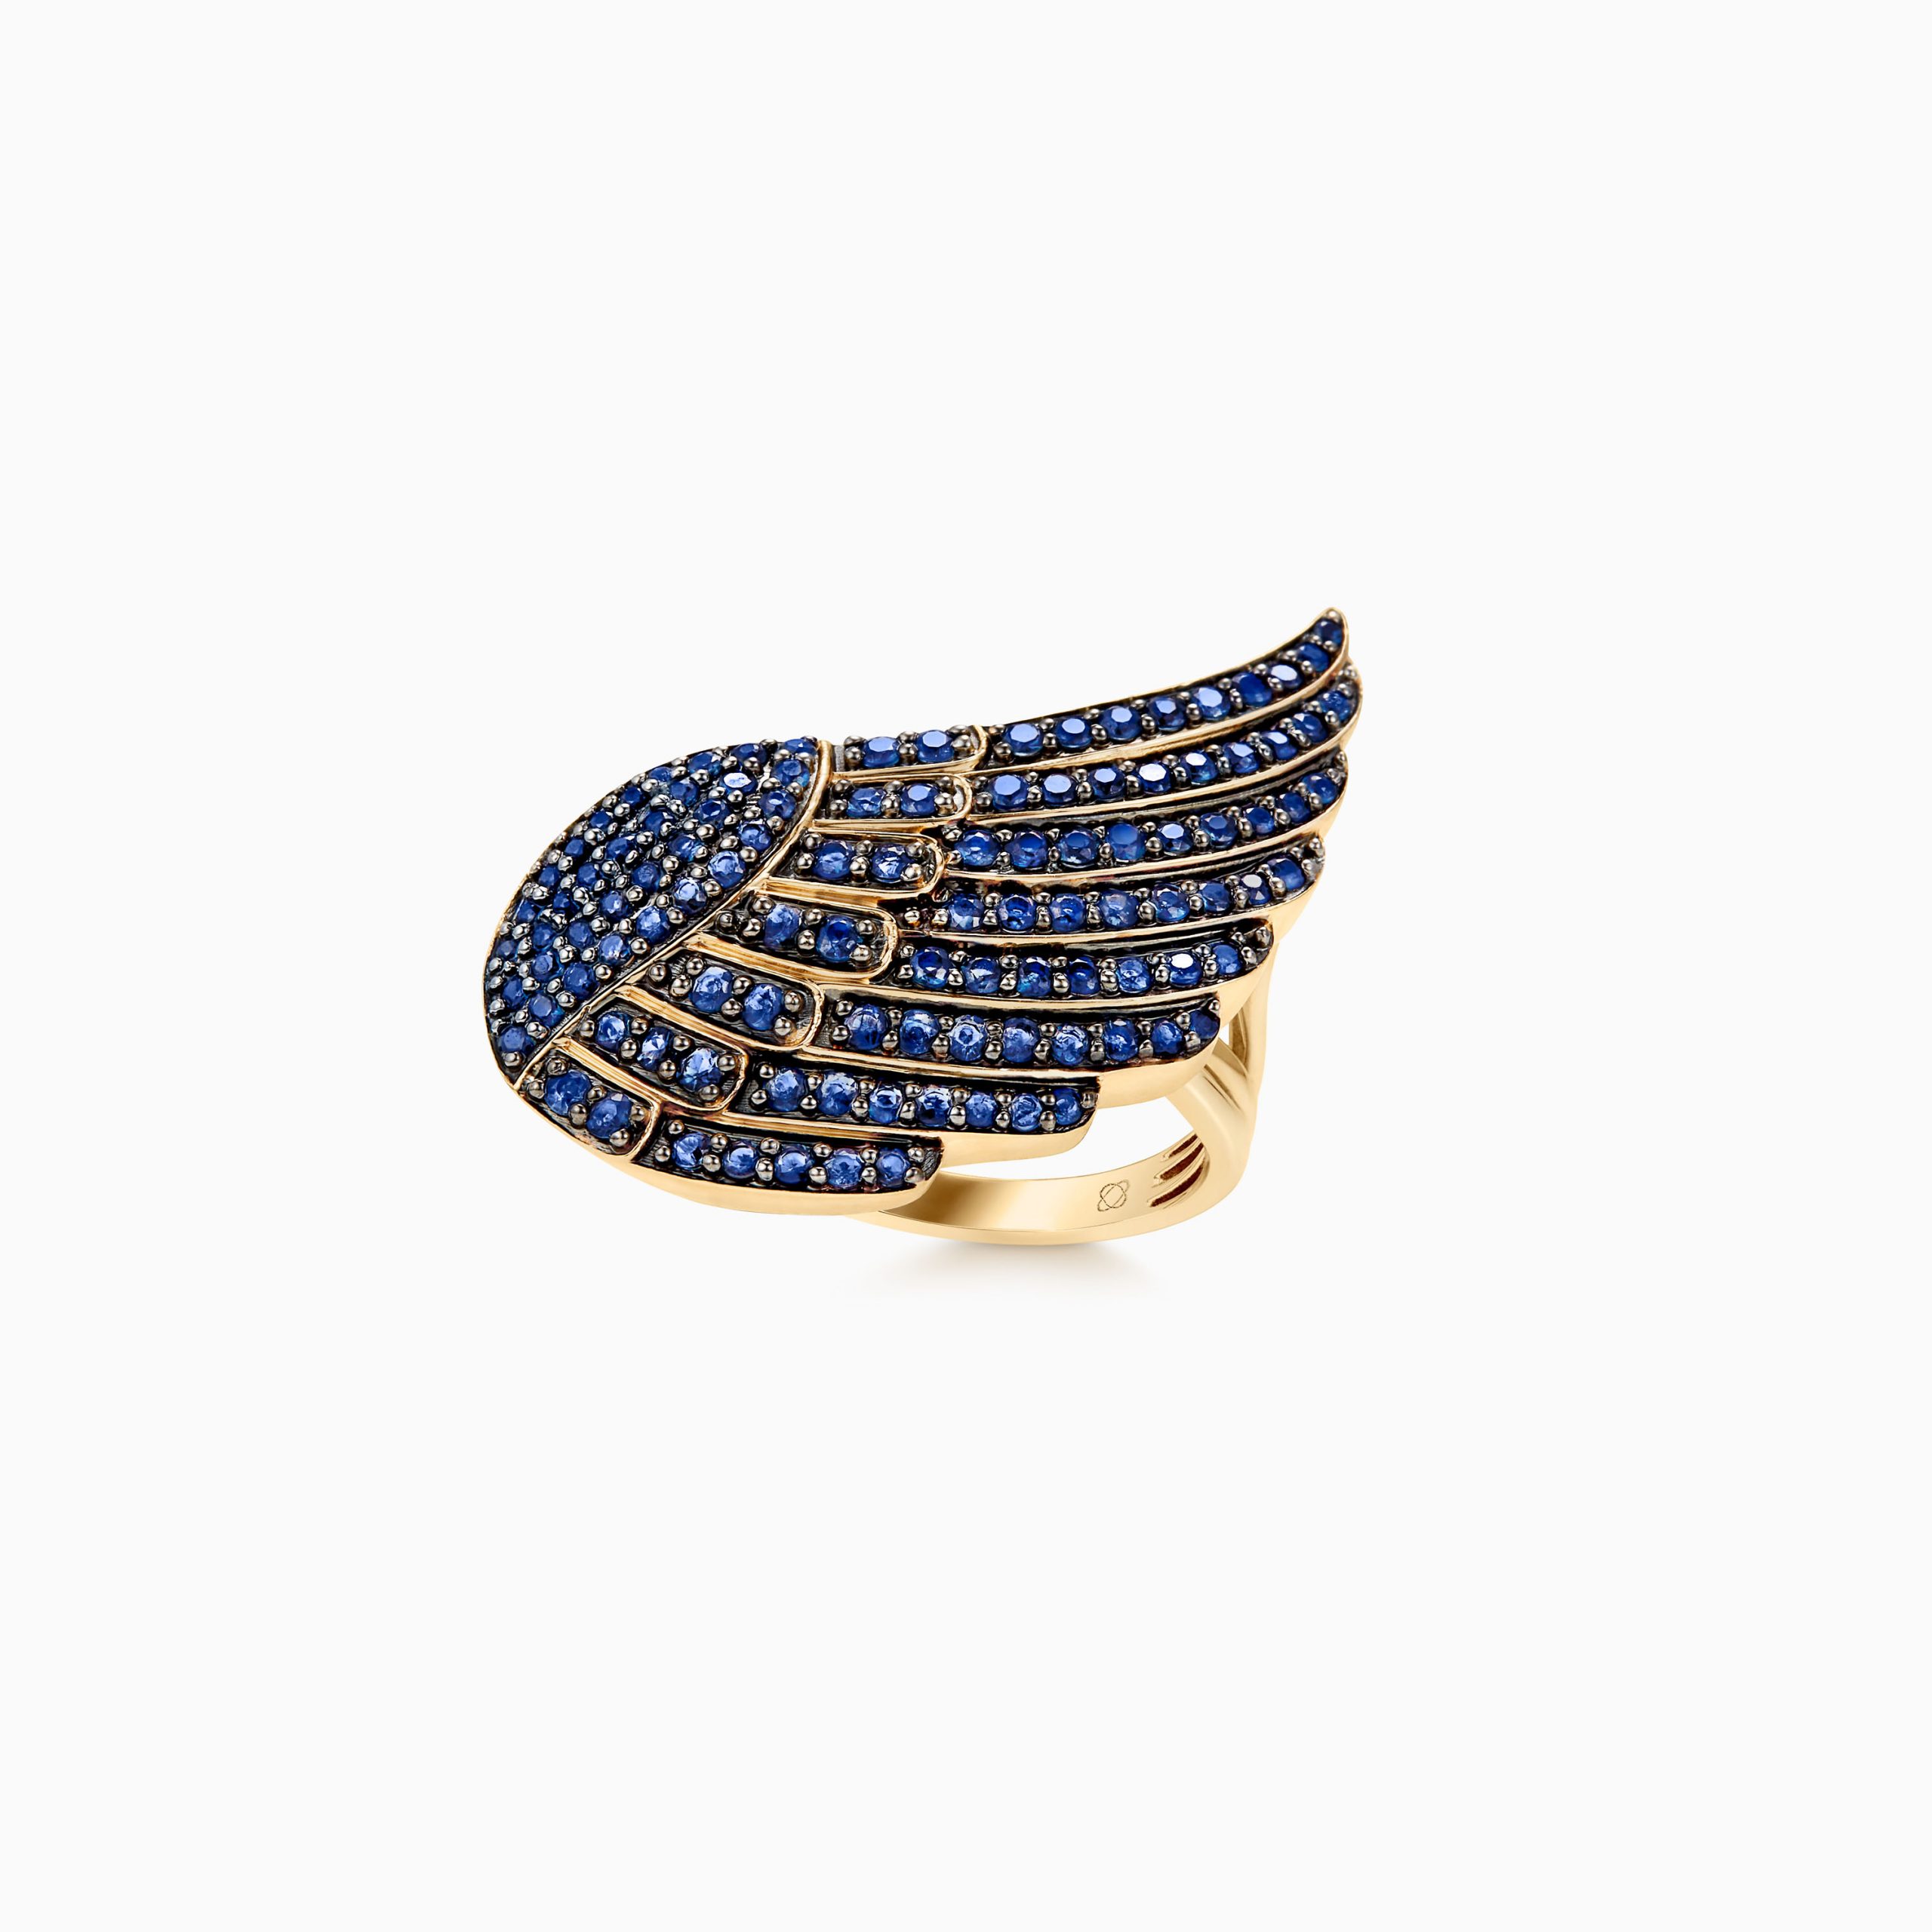 The blue Brahe wing ring - Ebba Brahe